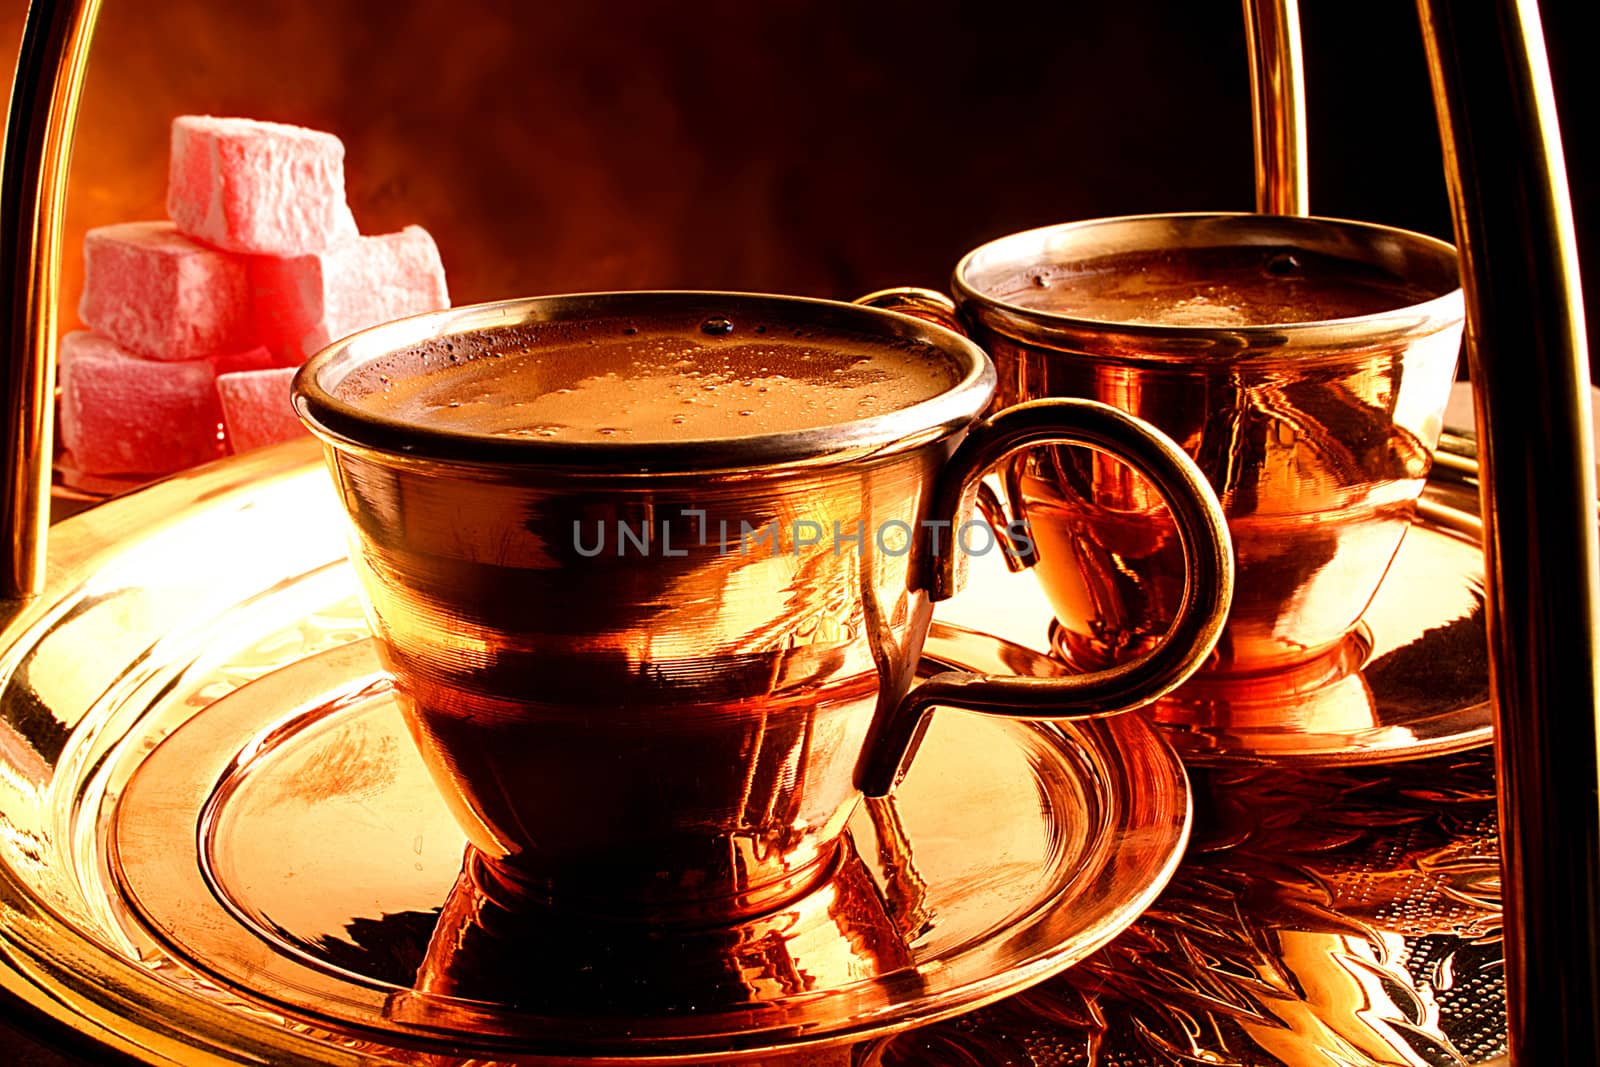 Two cups of turkish coffee by DiVal